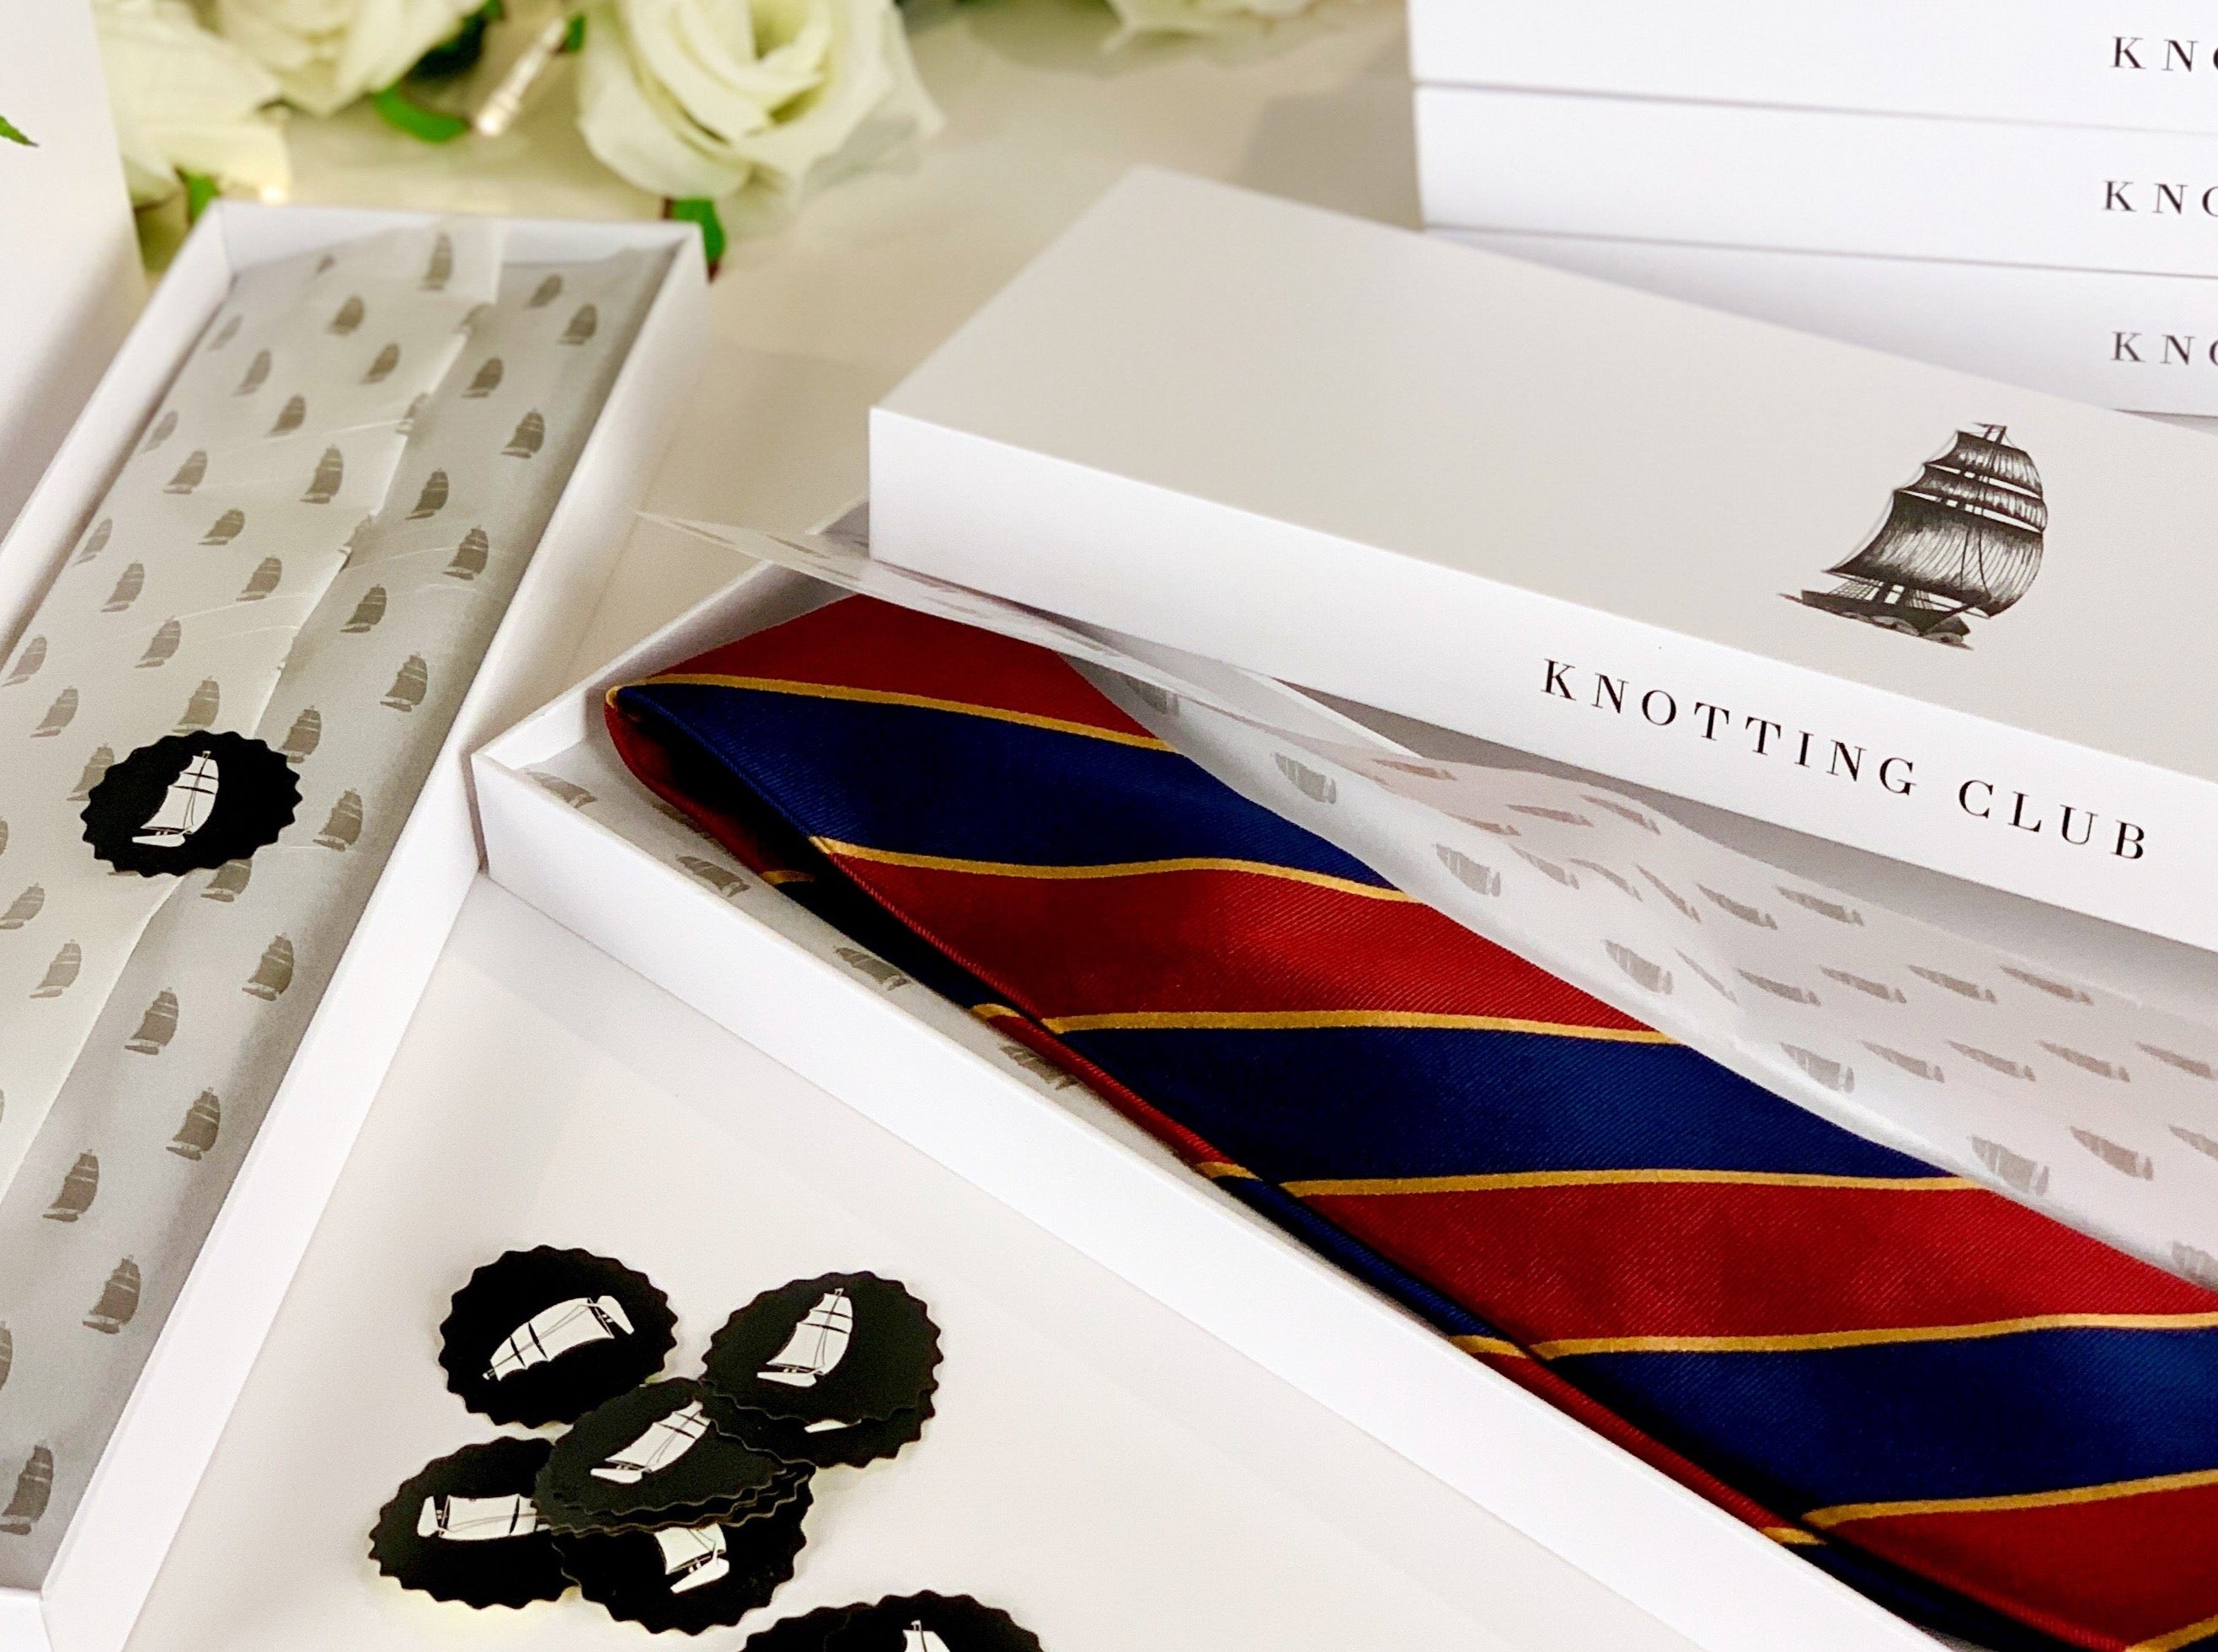 Mulberry Silk twill regimental tie with navy blue and red strikes and gold woven detailing lying in a tie box and wrapped with gift wrapping paper